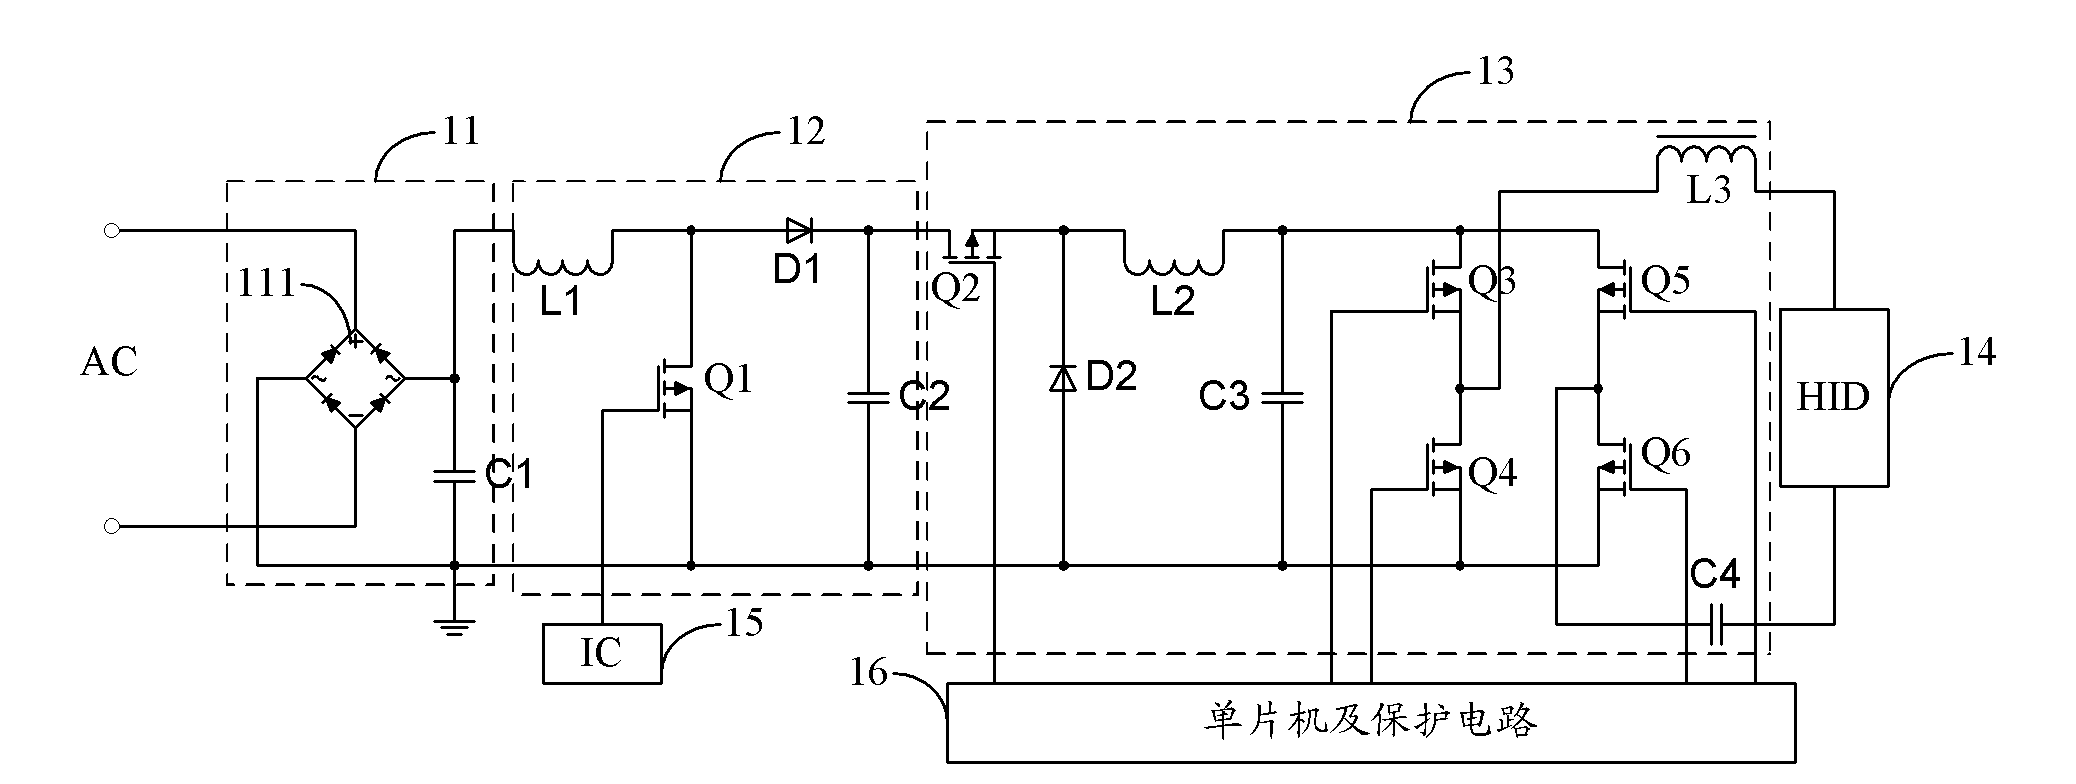 HID electronic ballasting circuit, electronic ballast and HID lamp